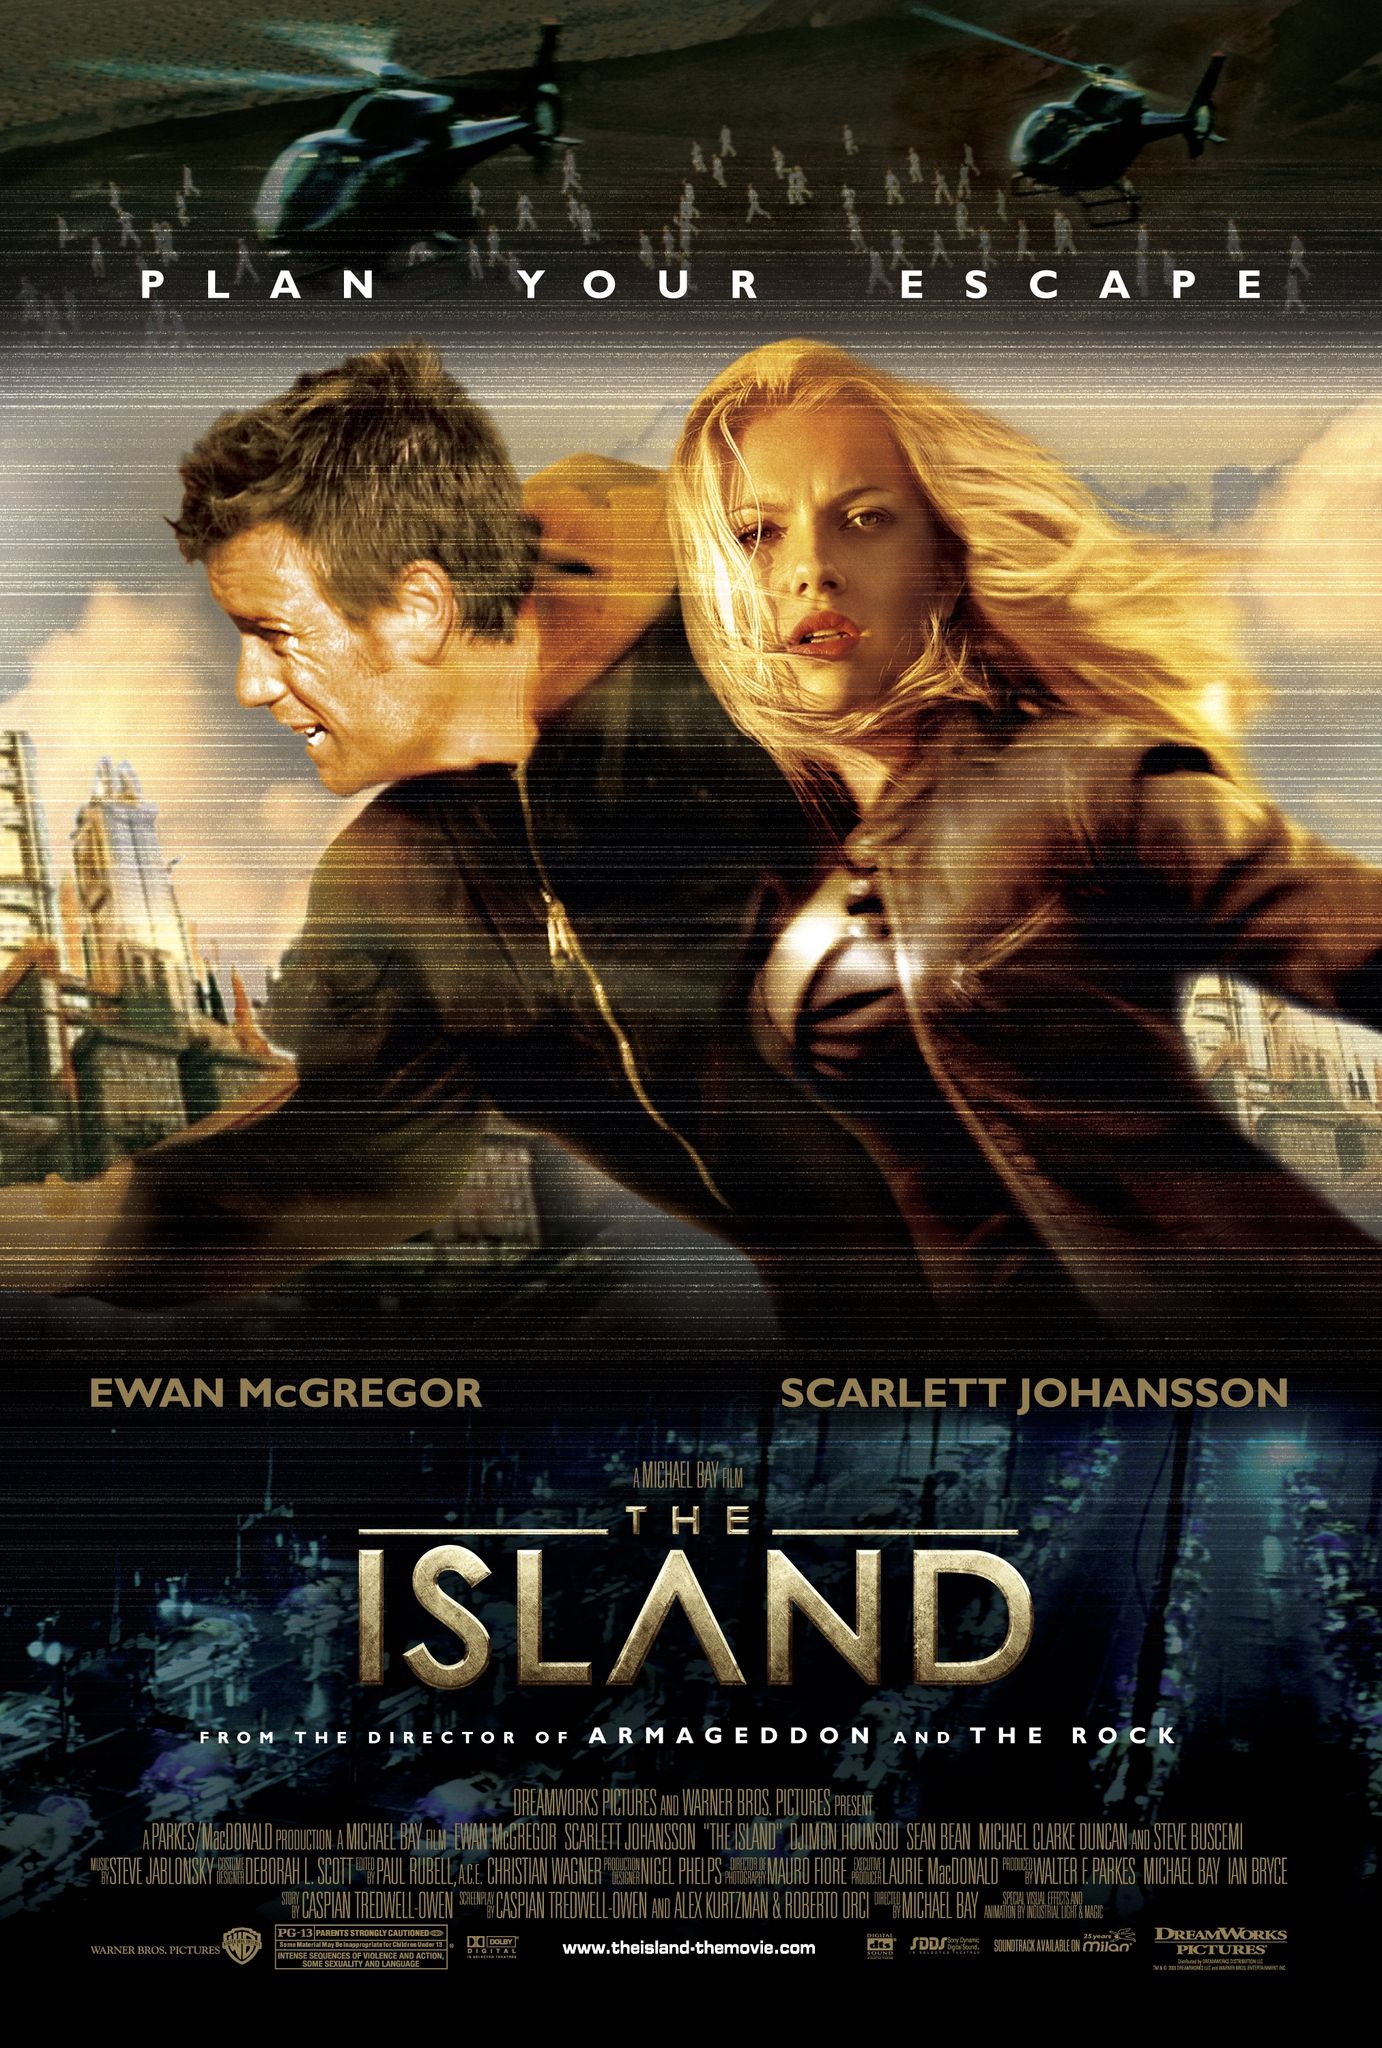 The Island official poster